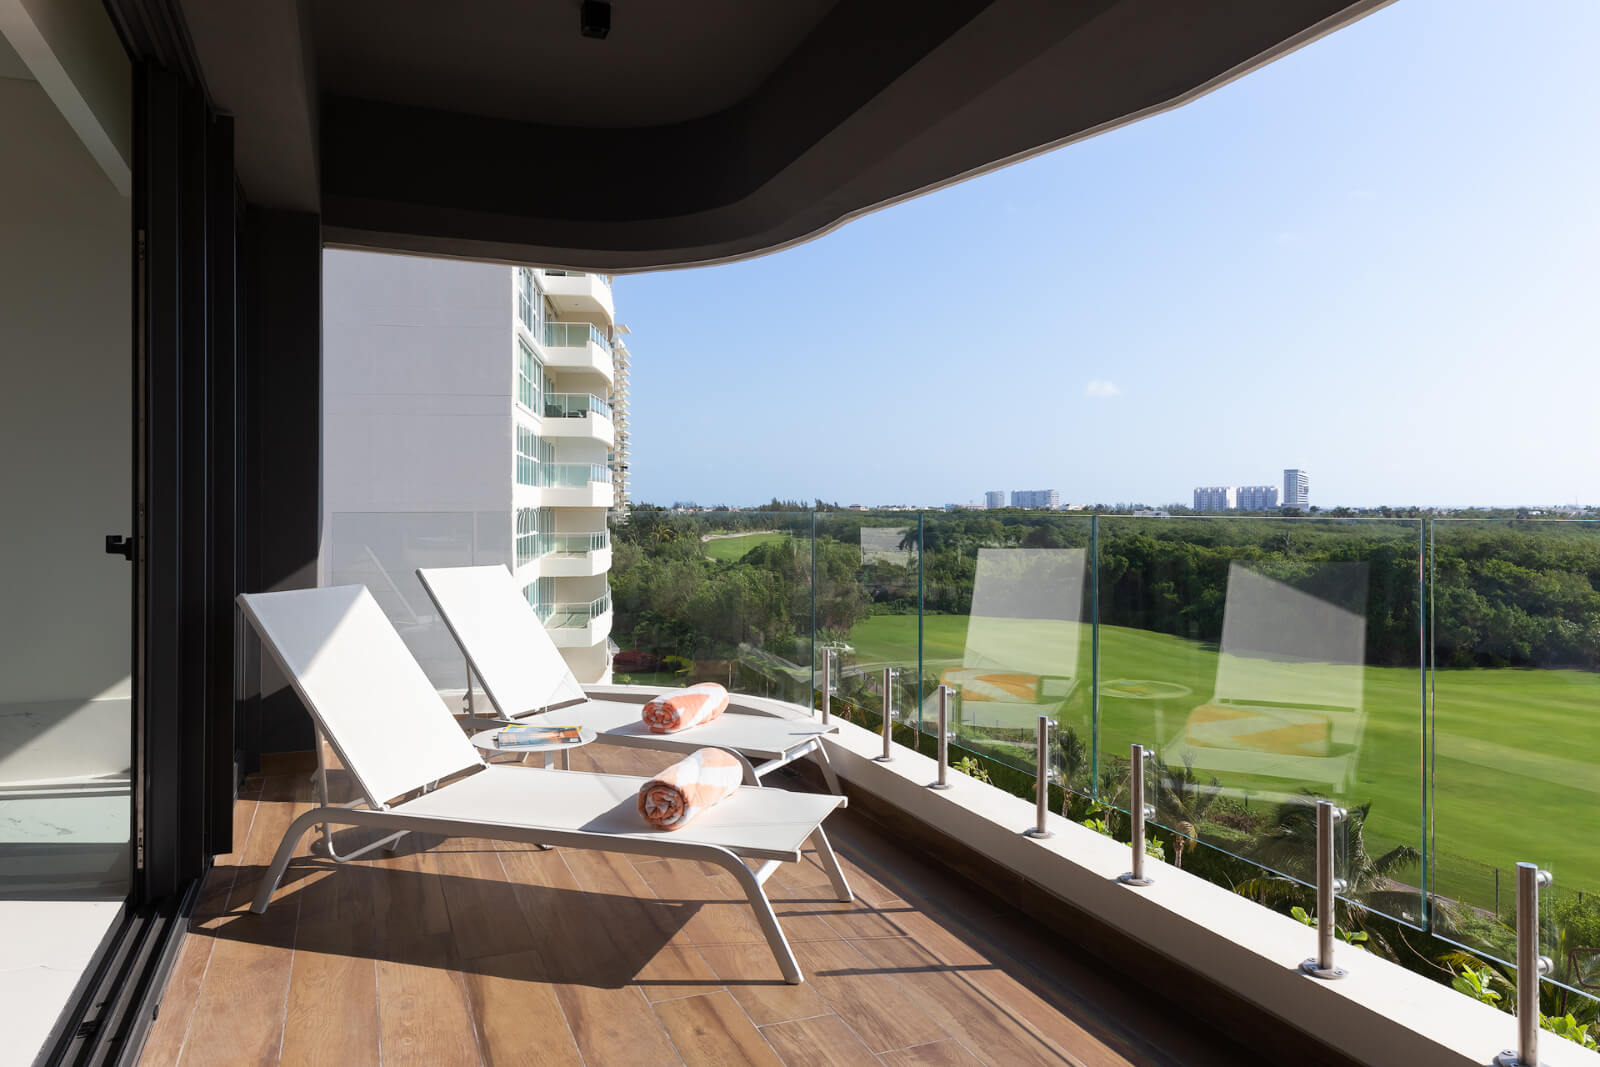 3-bedroom condo in front of the marina, overlooking the golf course